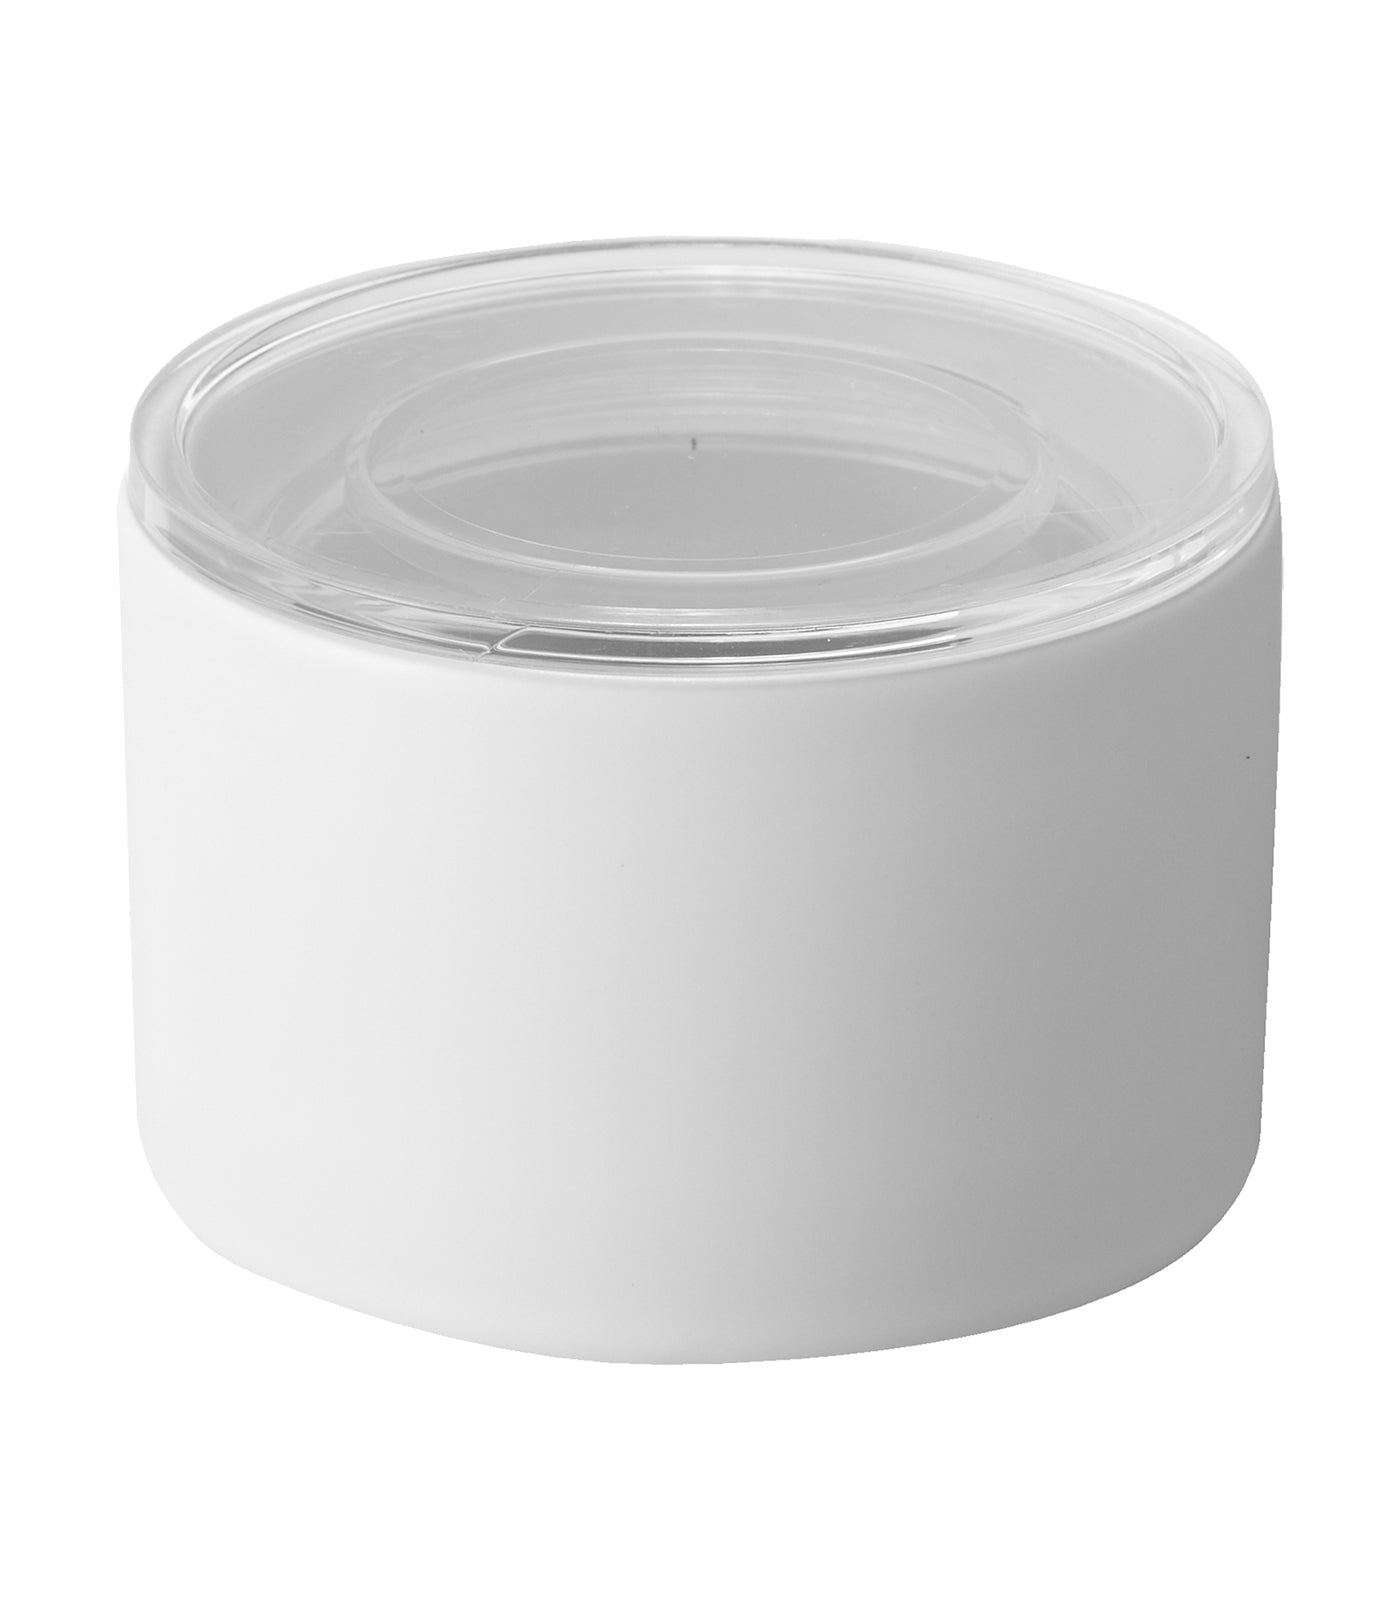 Ceramic-Canister-Two-Sizes-Food-Storage